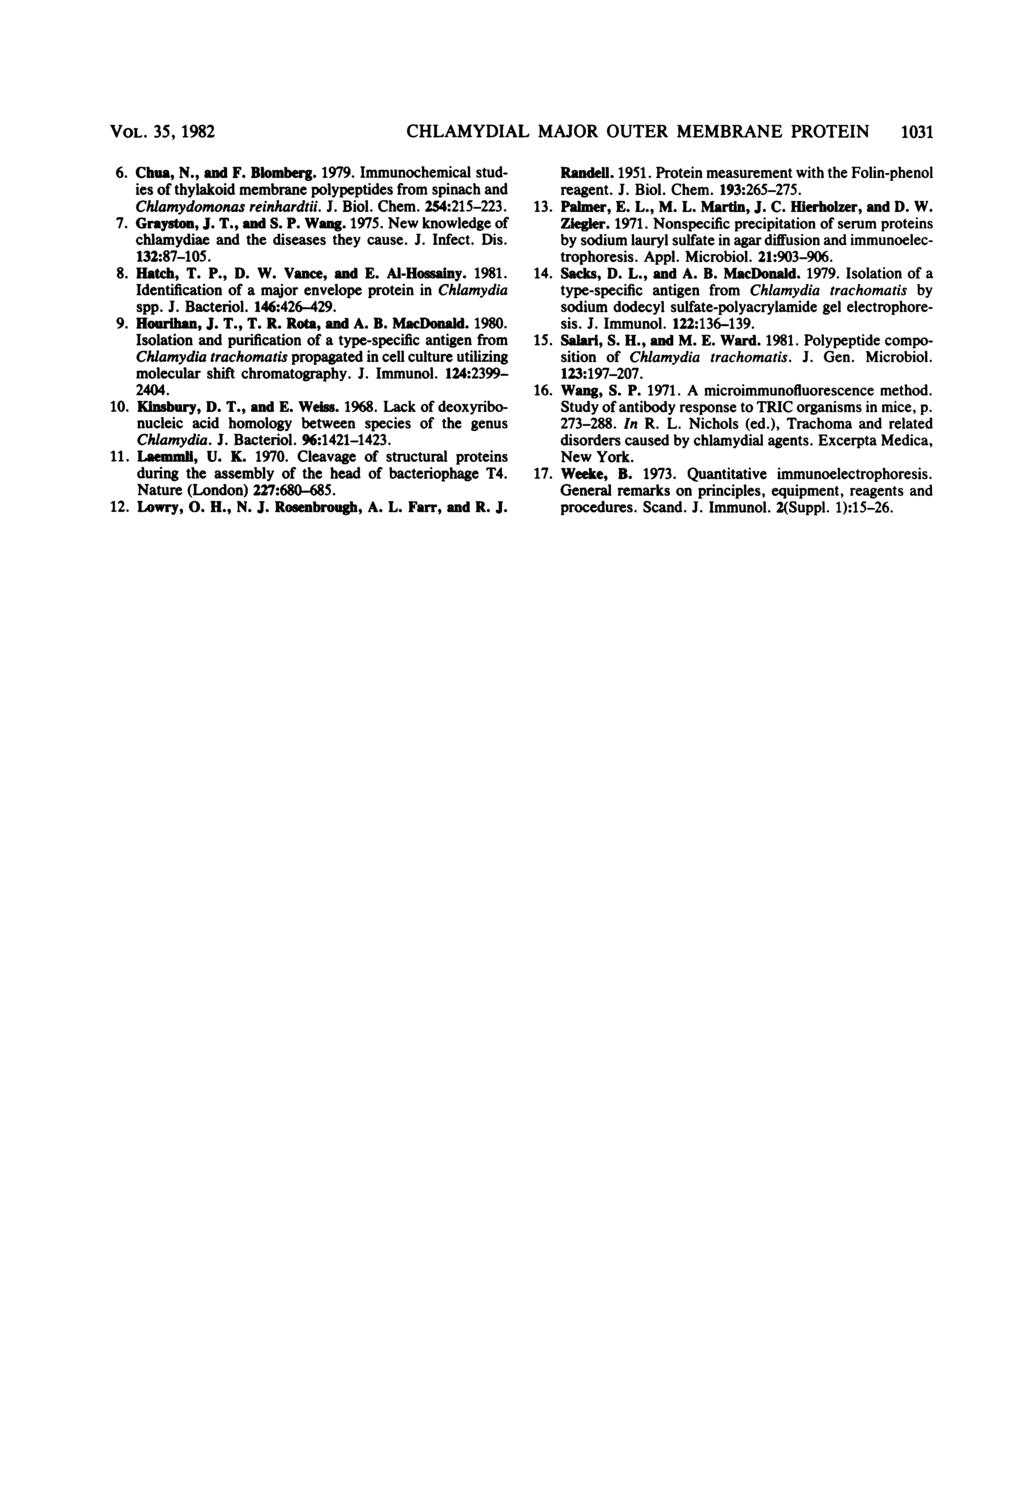 VOL. 35, 1982 CHLAMYDIAL MAJOR OUTER MEMBRANE PROTEIN 1031 6. Chua, N., and F. Blomberg. 1979. Immunochemical studies of thylakoid membrane polypeptides from spinach and Chlamydomonas reinhardtii. J.